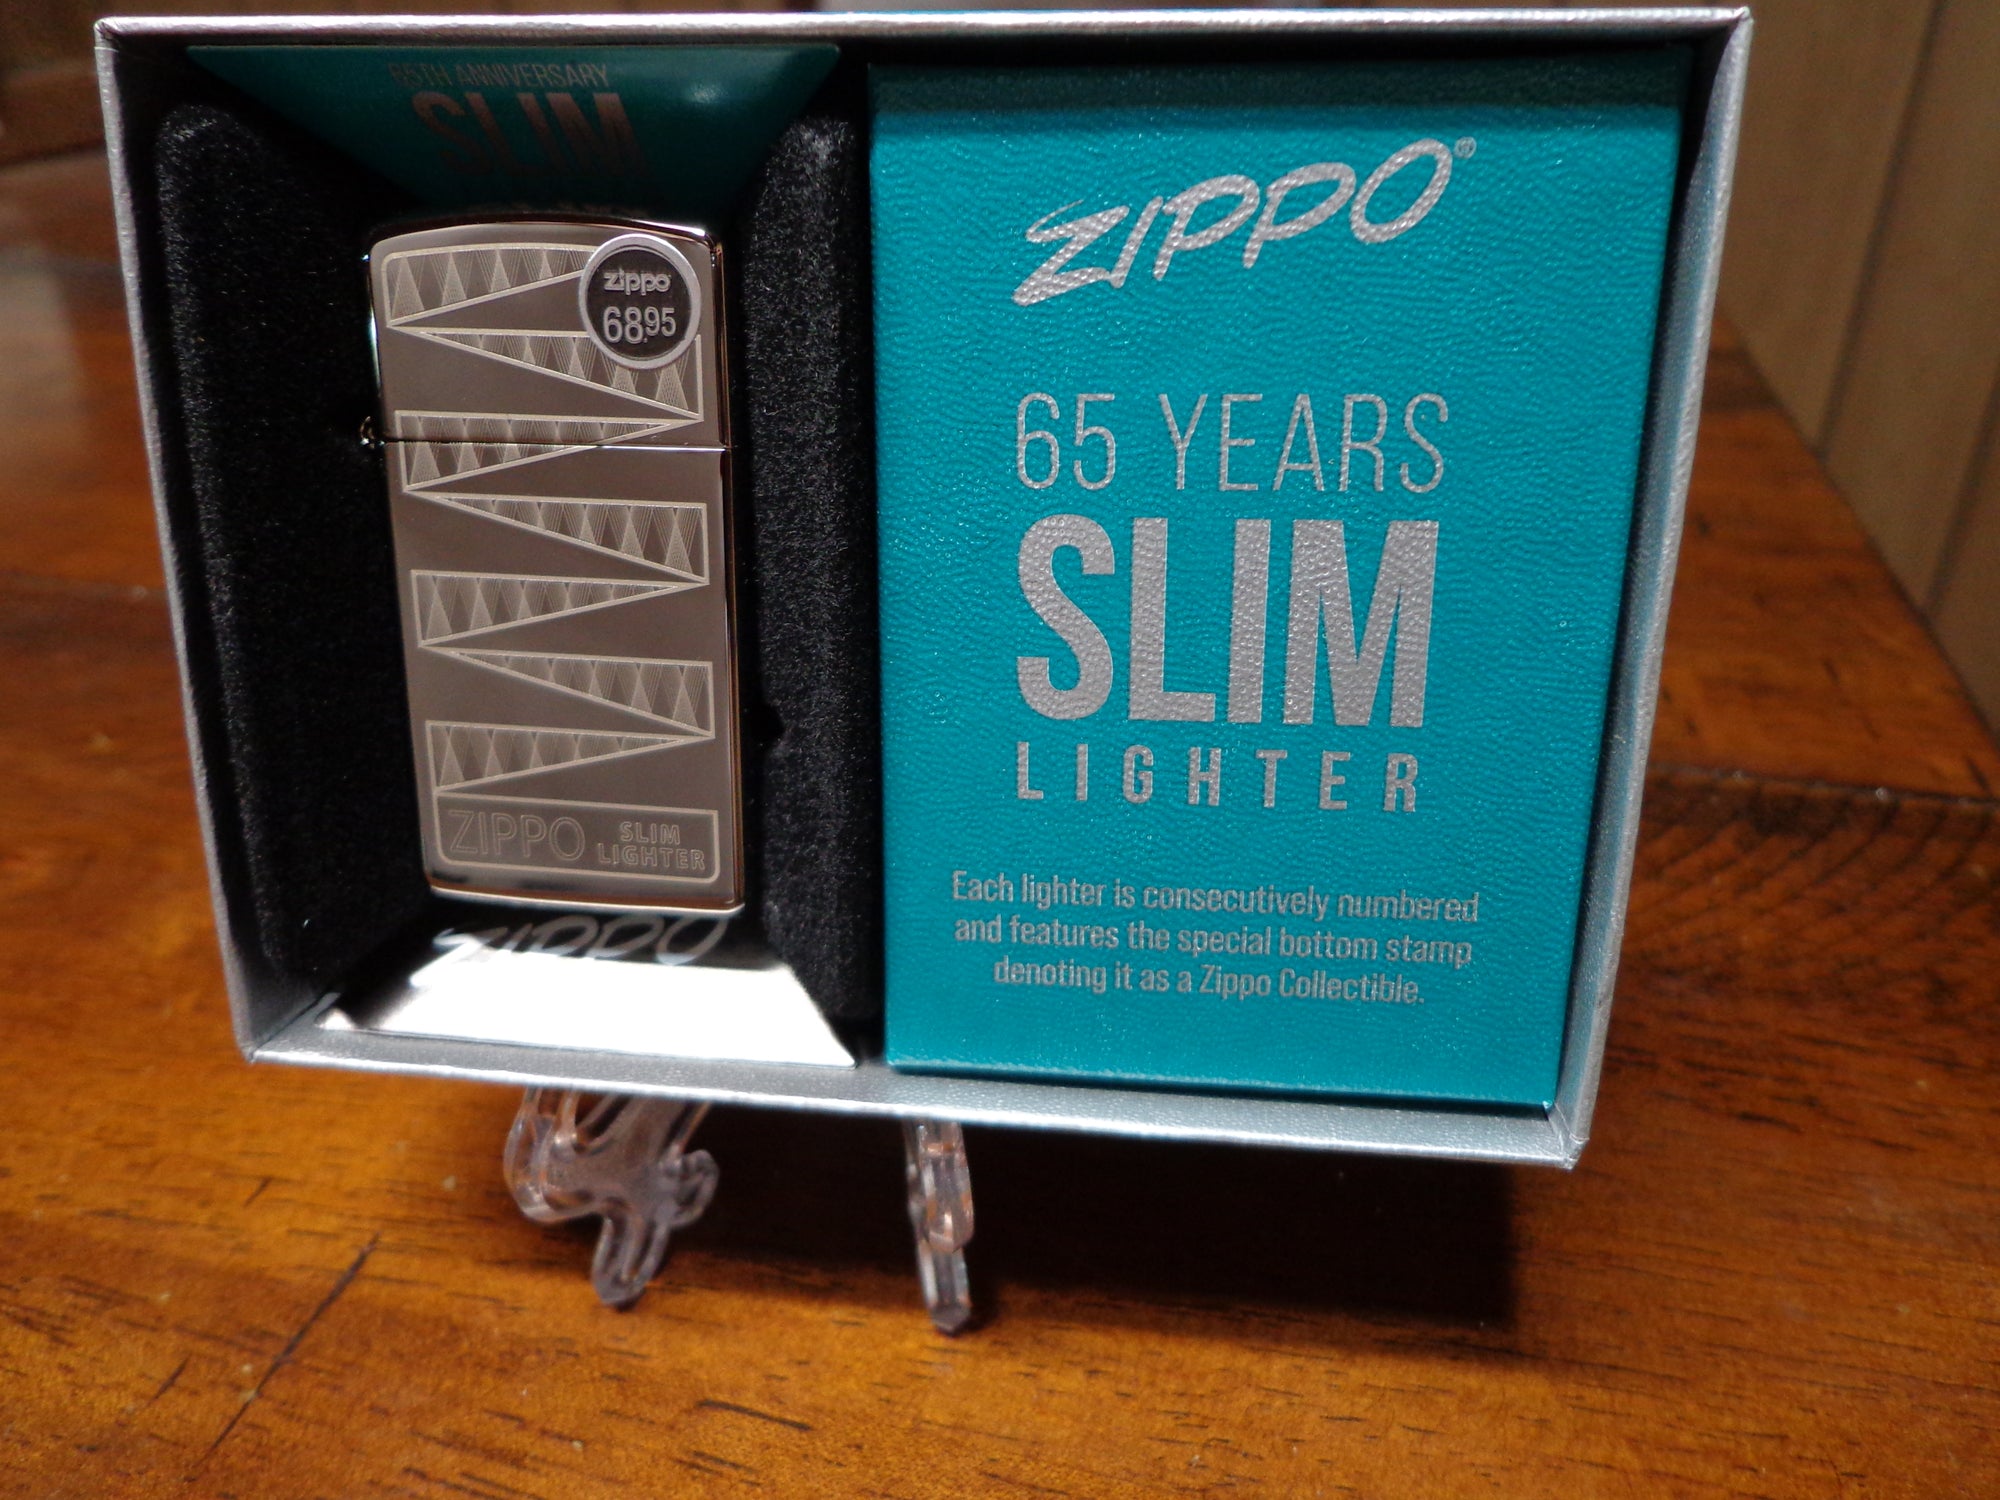 65th Anniversary of the Zippo Slim Lighter Limited Edition 12,000 made